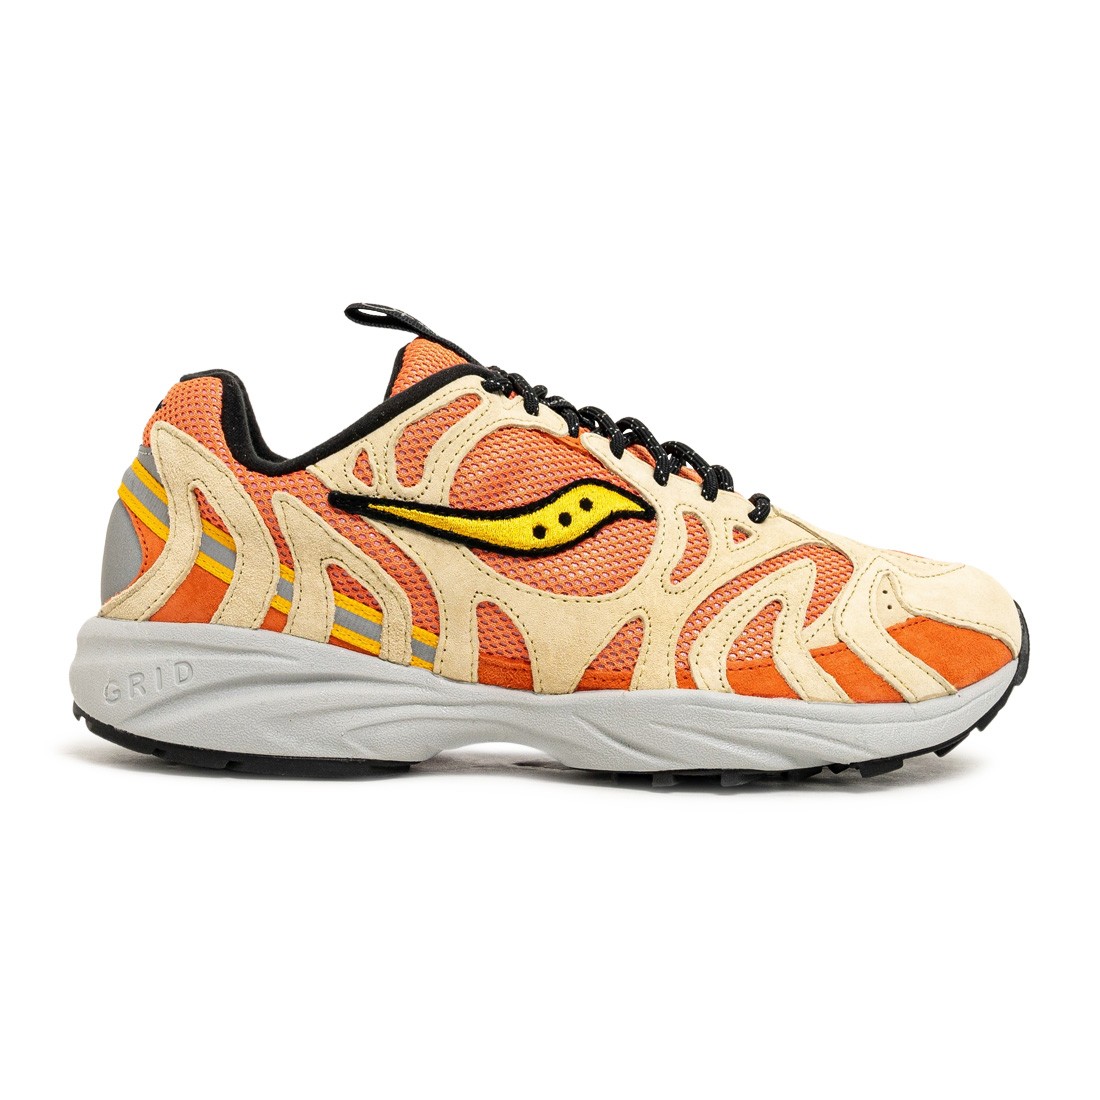 The Saucony Soarin J 2 is a multi-event track shoe highly recommended for